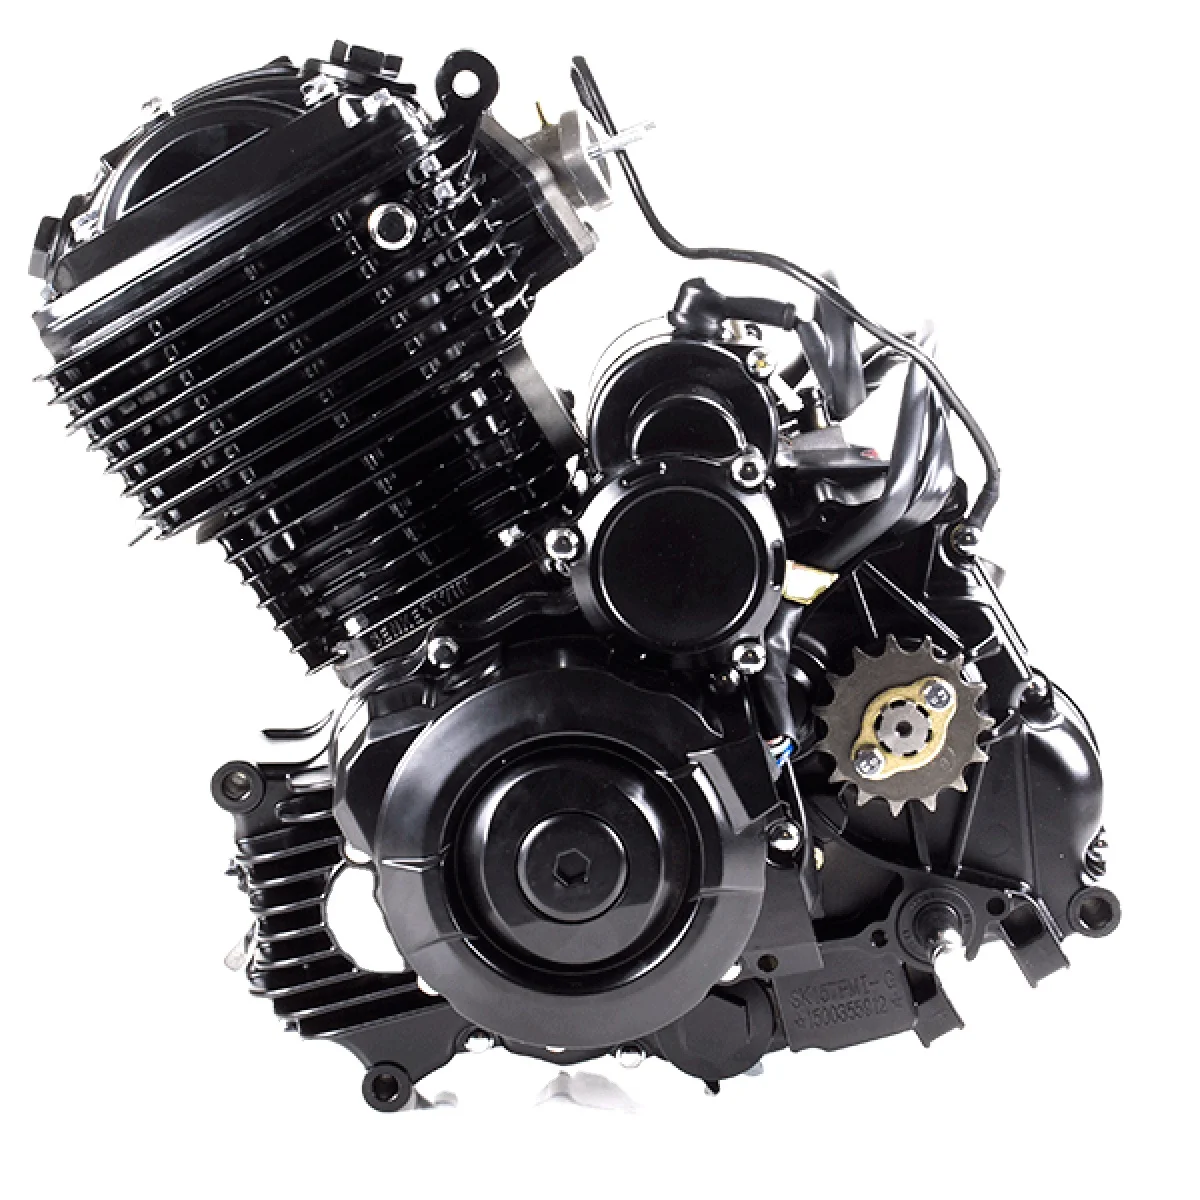 China High Quality Motorcycle Engine Assembly Other 125cc Engines Motorcycle For Suzuki Ruishuang en125-3f